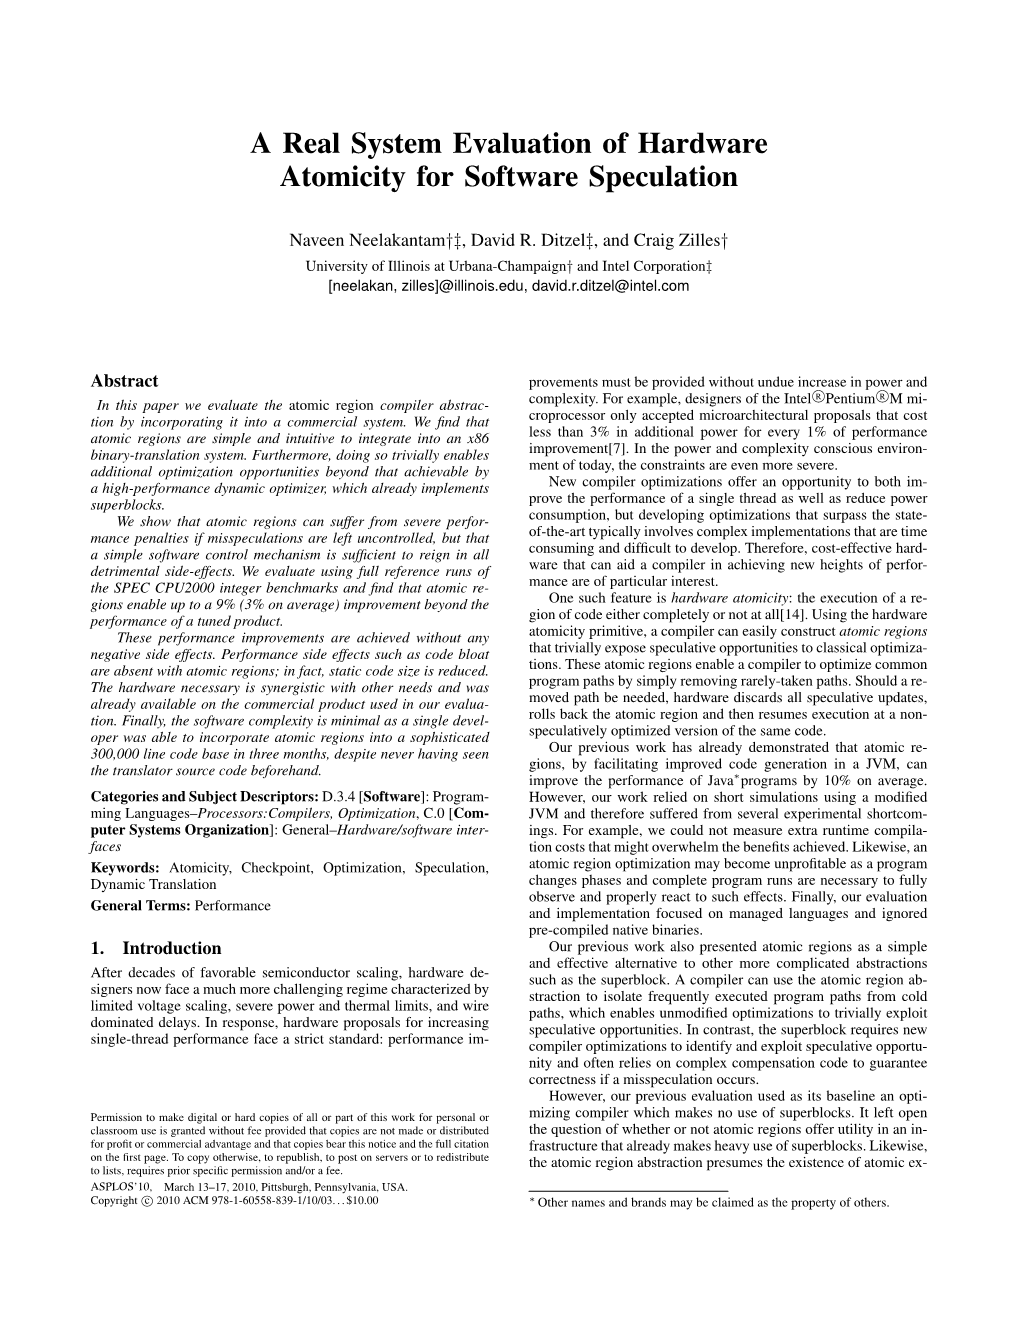 A Real System Evaluation of Hardware Atomicity for Software Speculation